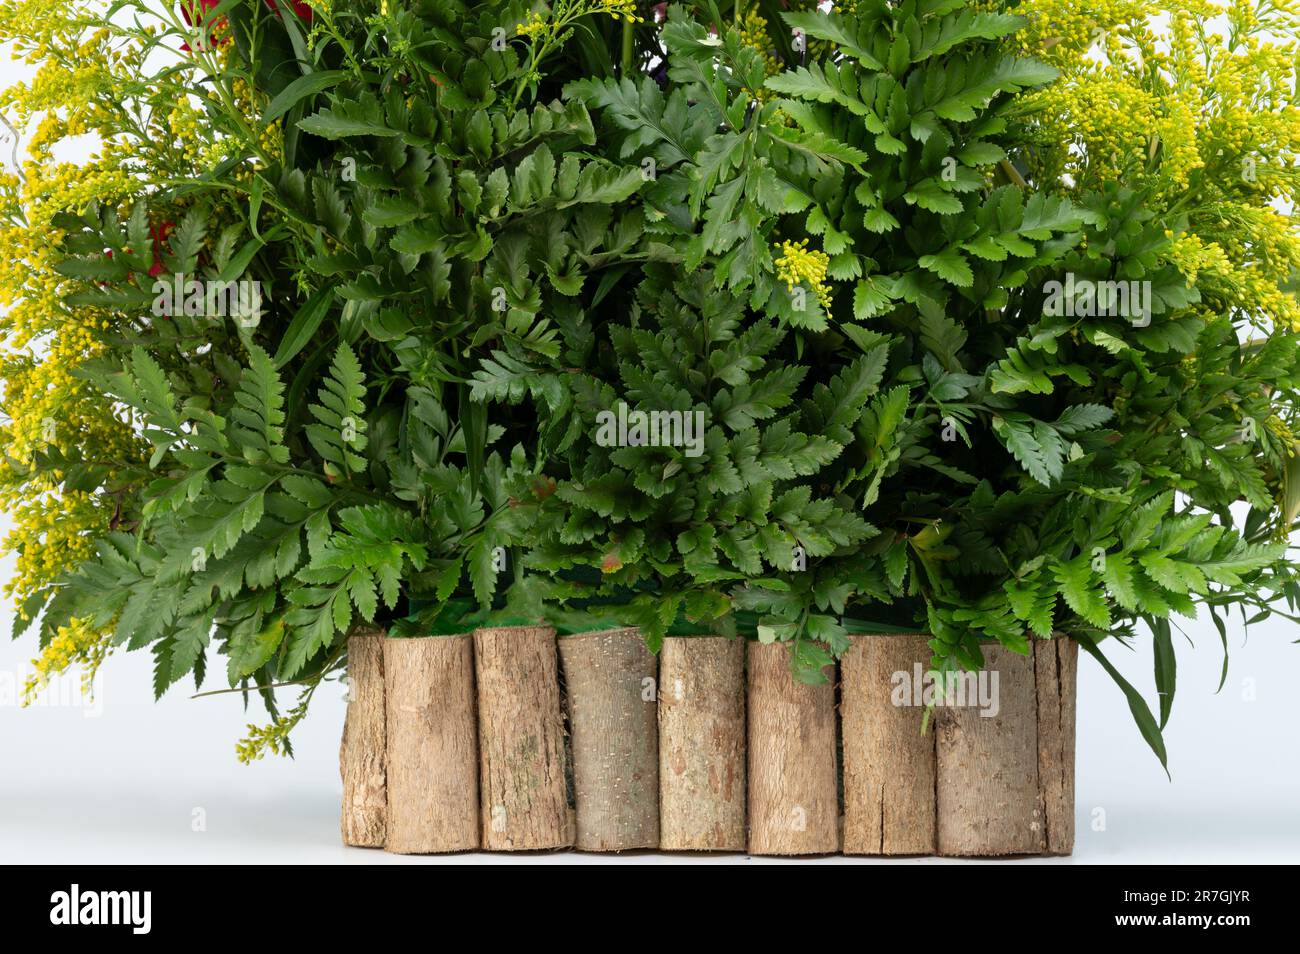 Big green plant decoration for garden or interior isolated on white studio background Stock Photo